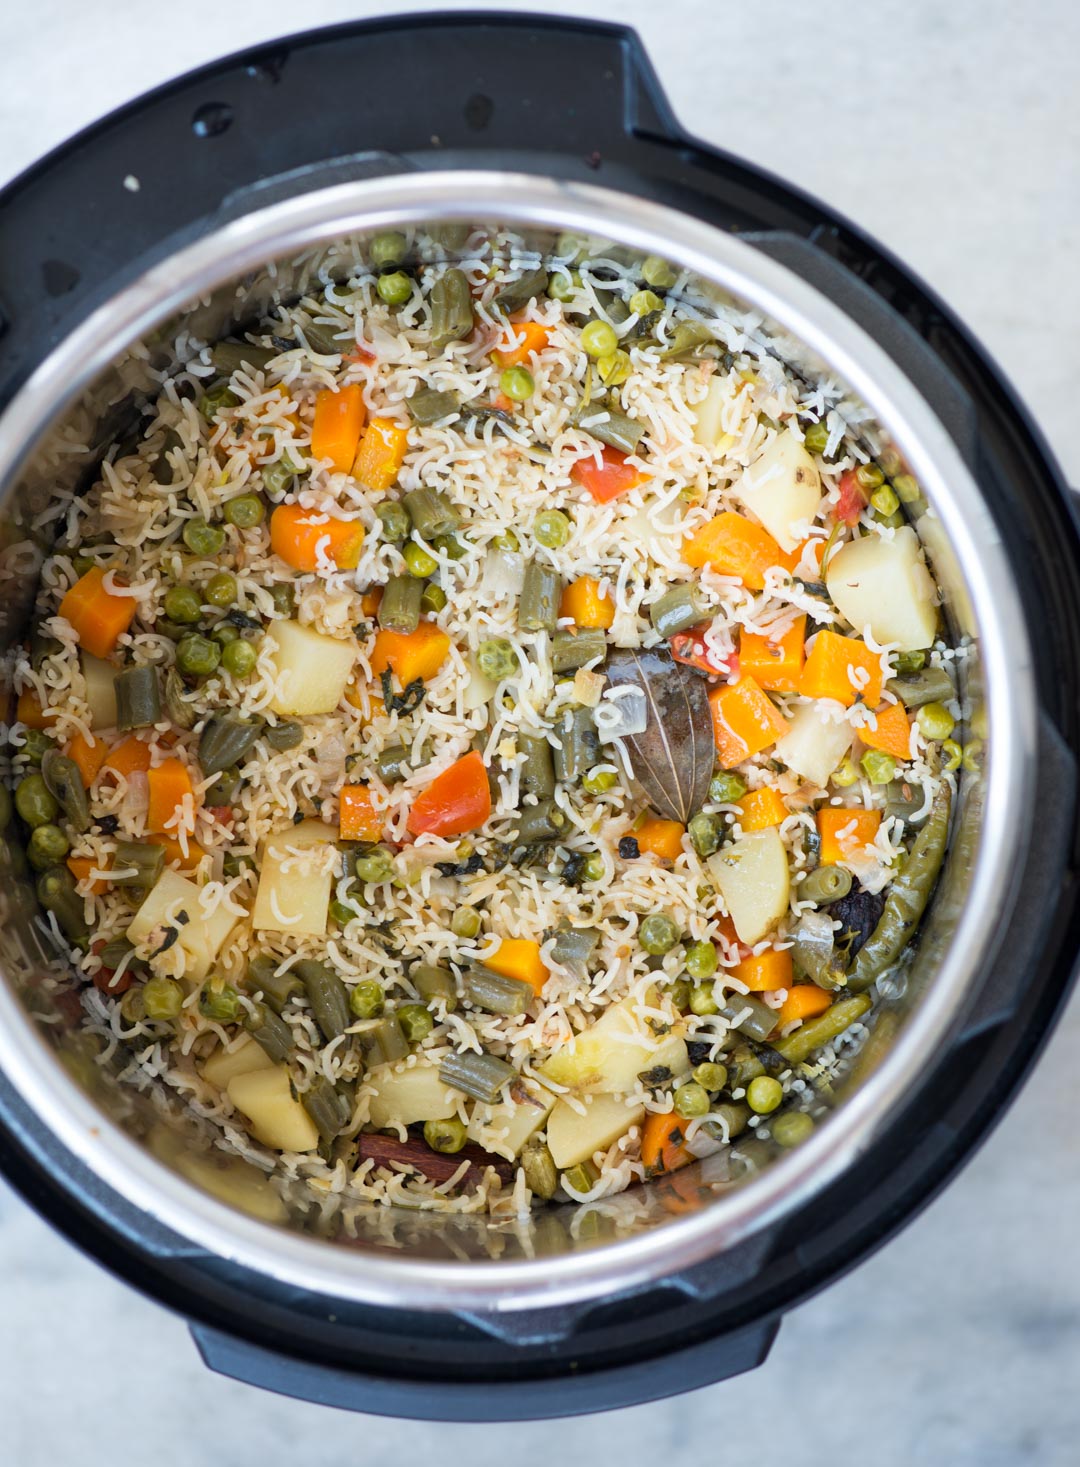 Top shot of vegetable pulao made with whole spices in an Instant Pot